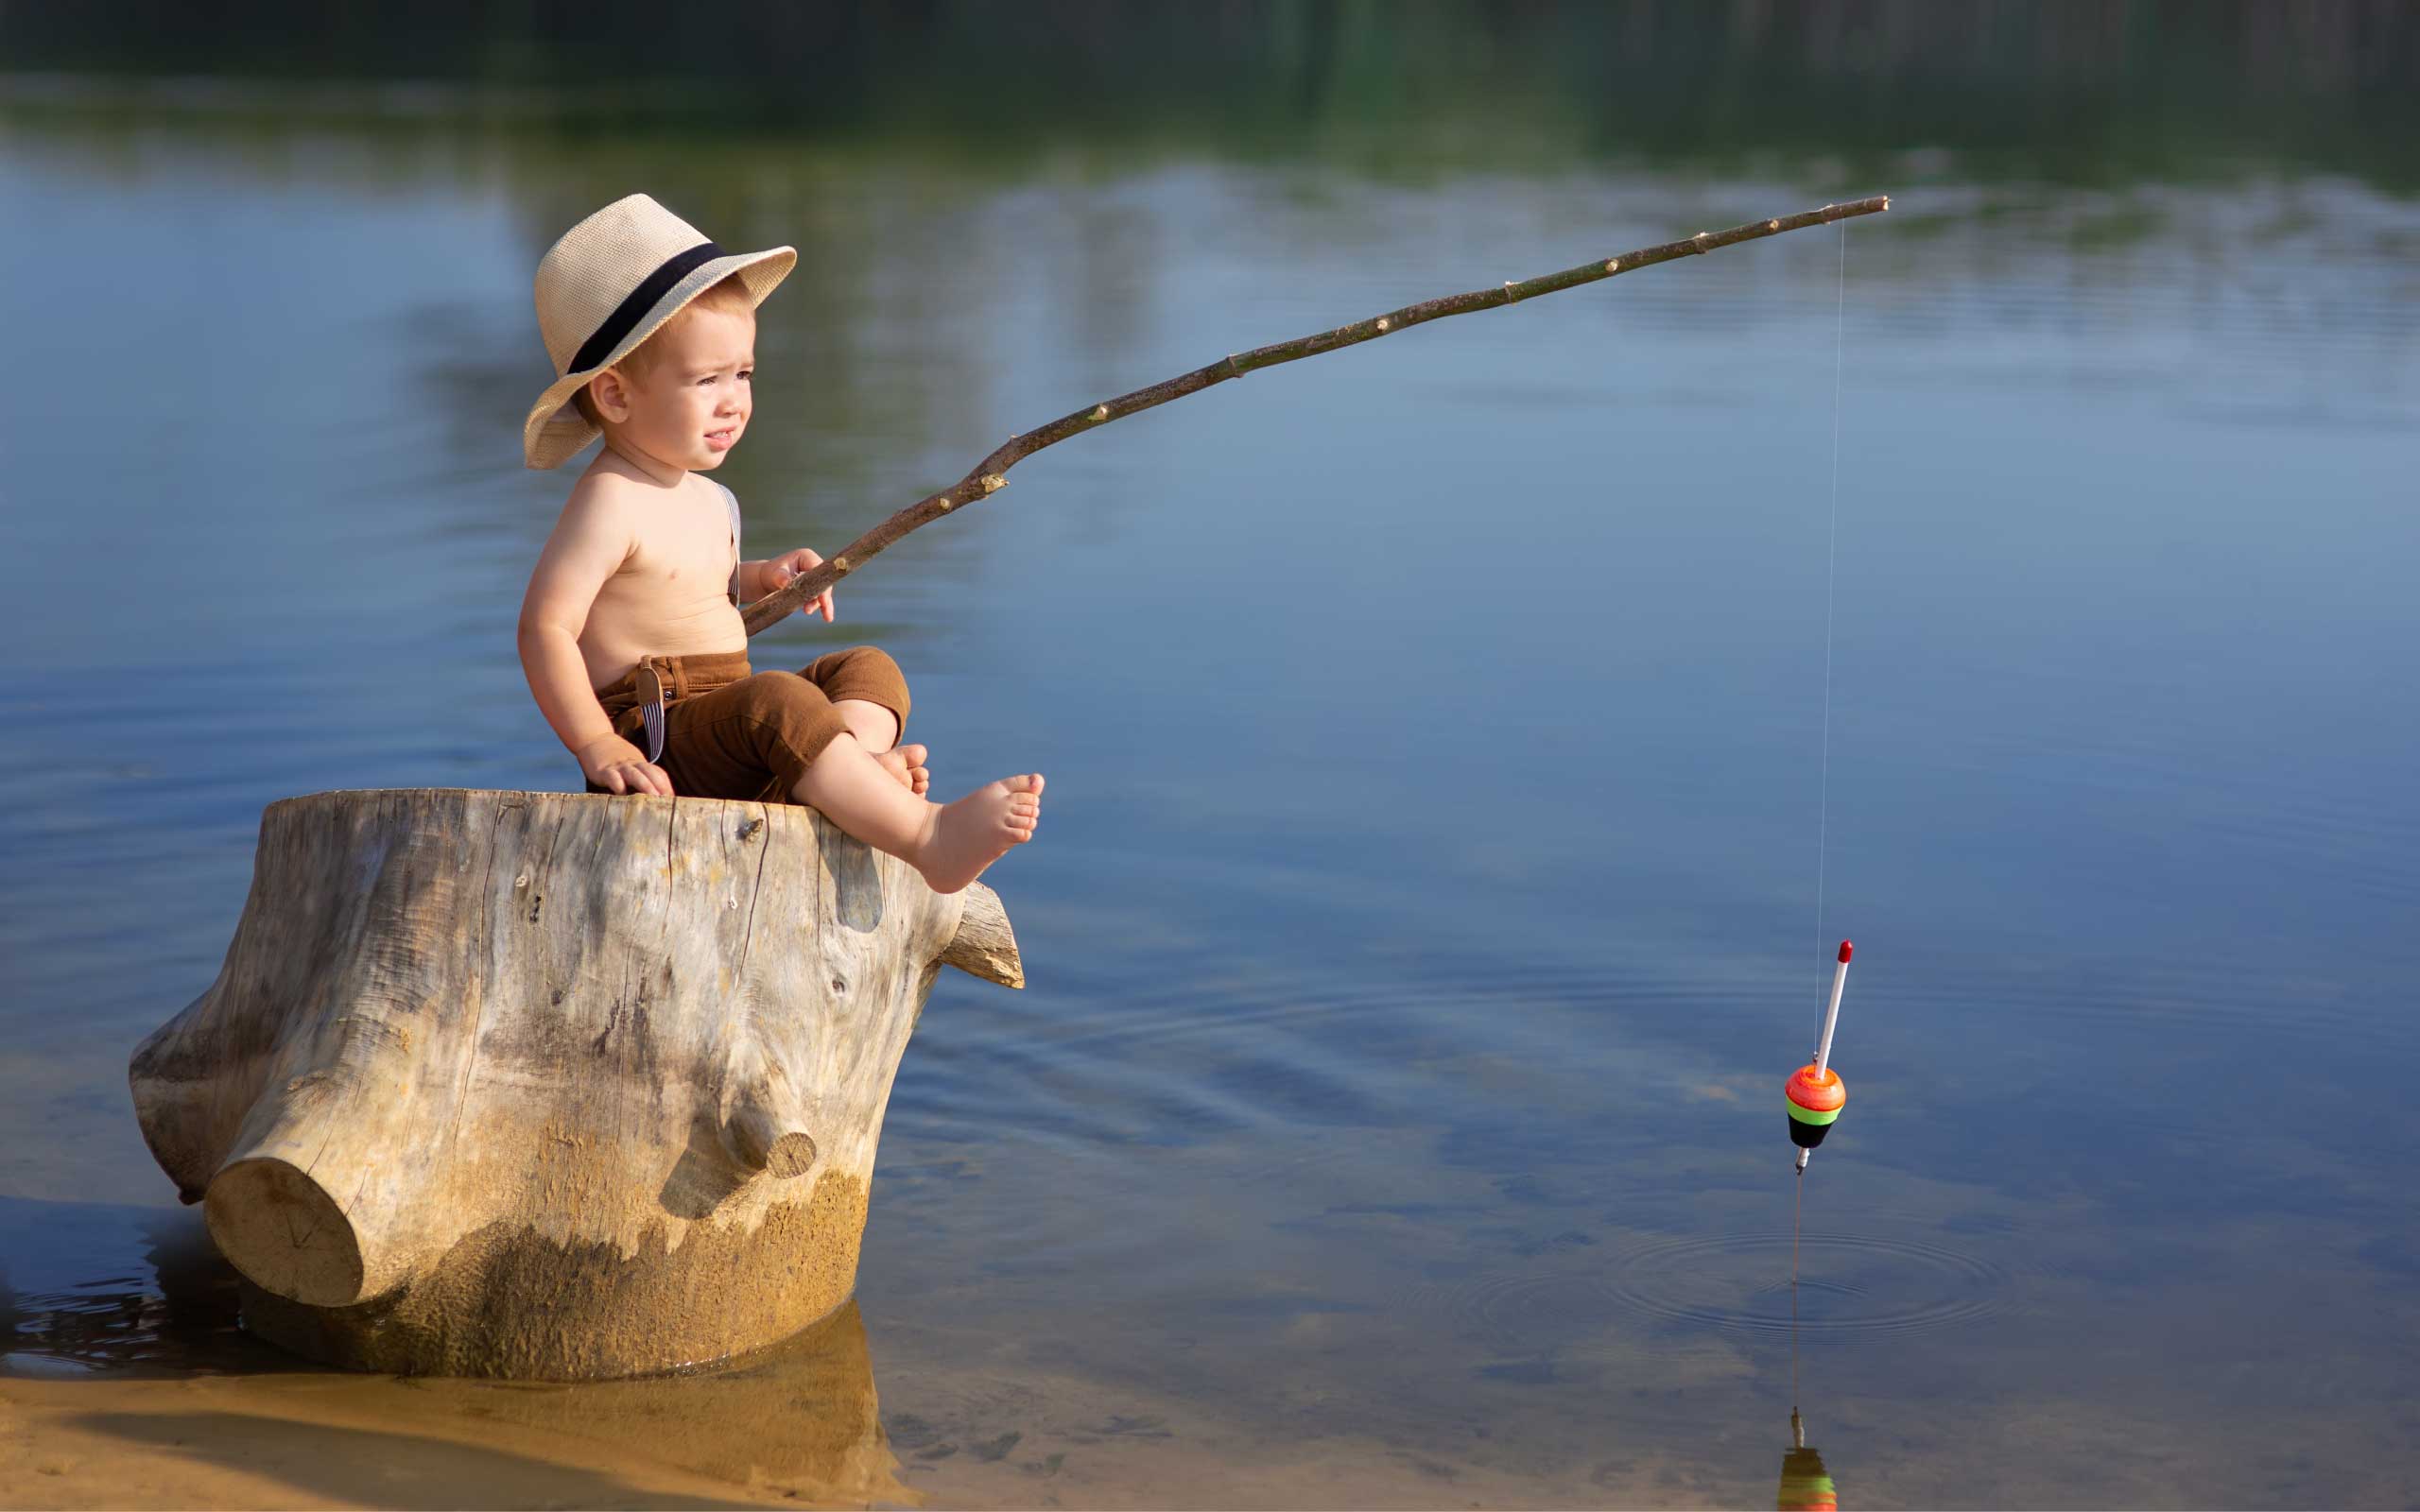 Still fishing or bobber fishing is the easiest type of fishing